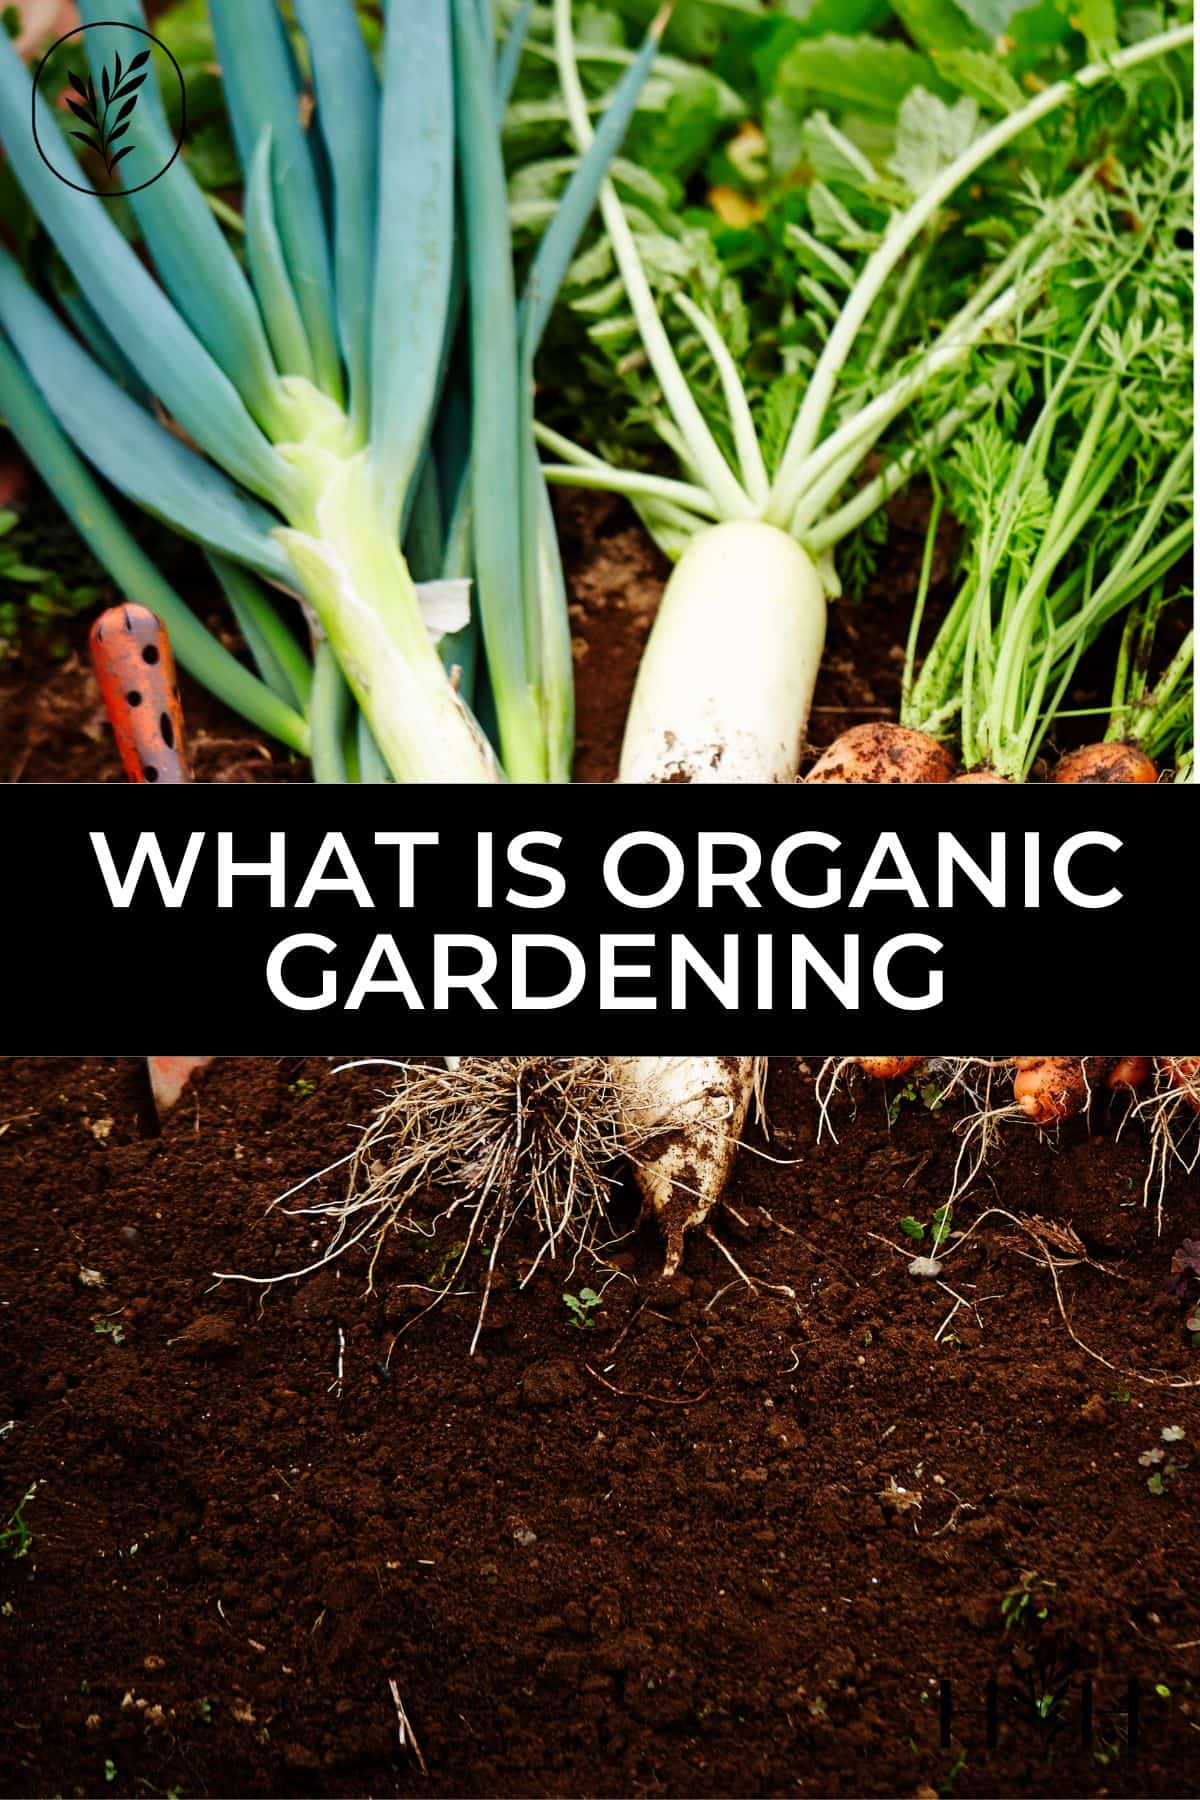 Organic gardening uses naturally-derived, minimally-processed supplies instead of synthetically-produced chemicals and other potential environmental contaminants via @home4theharvest